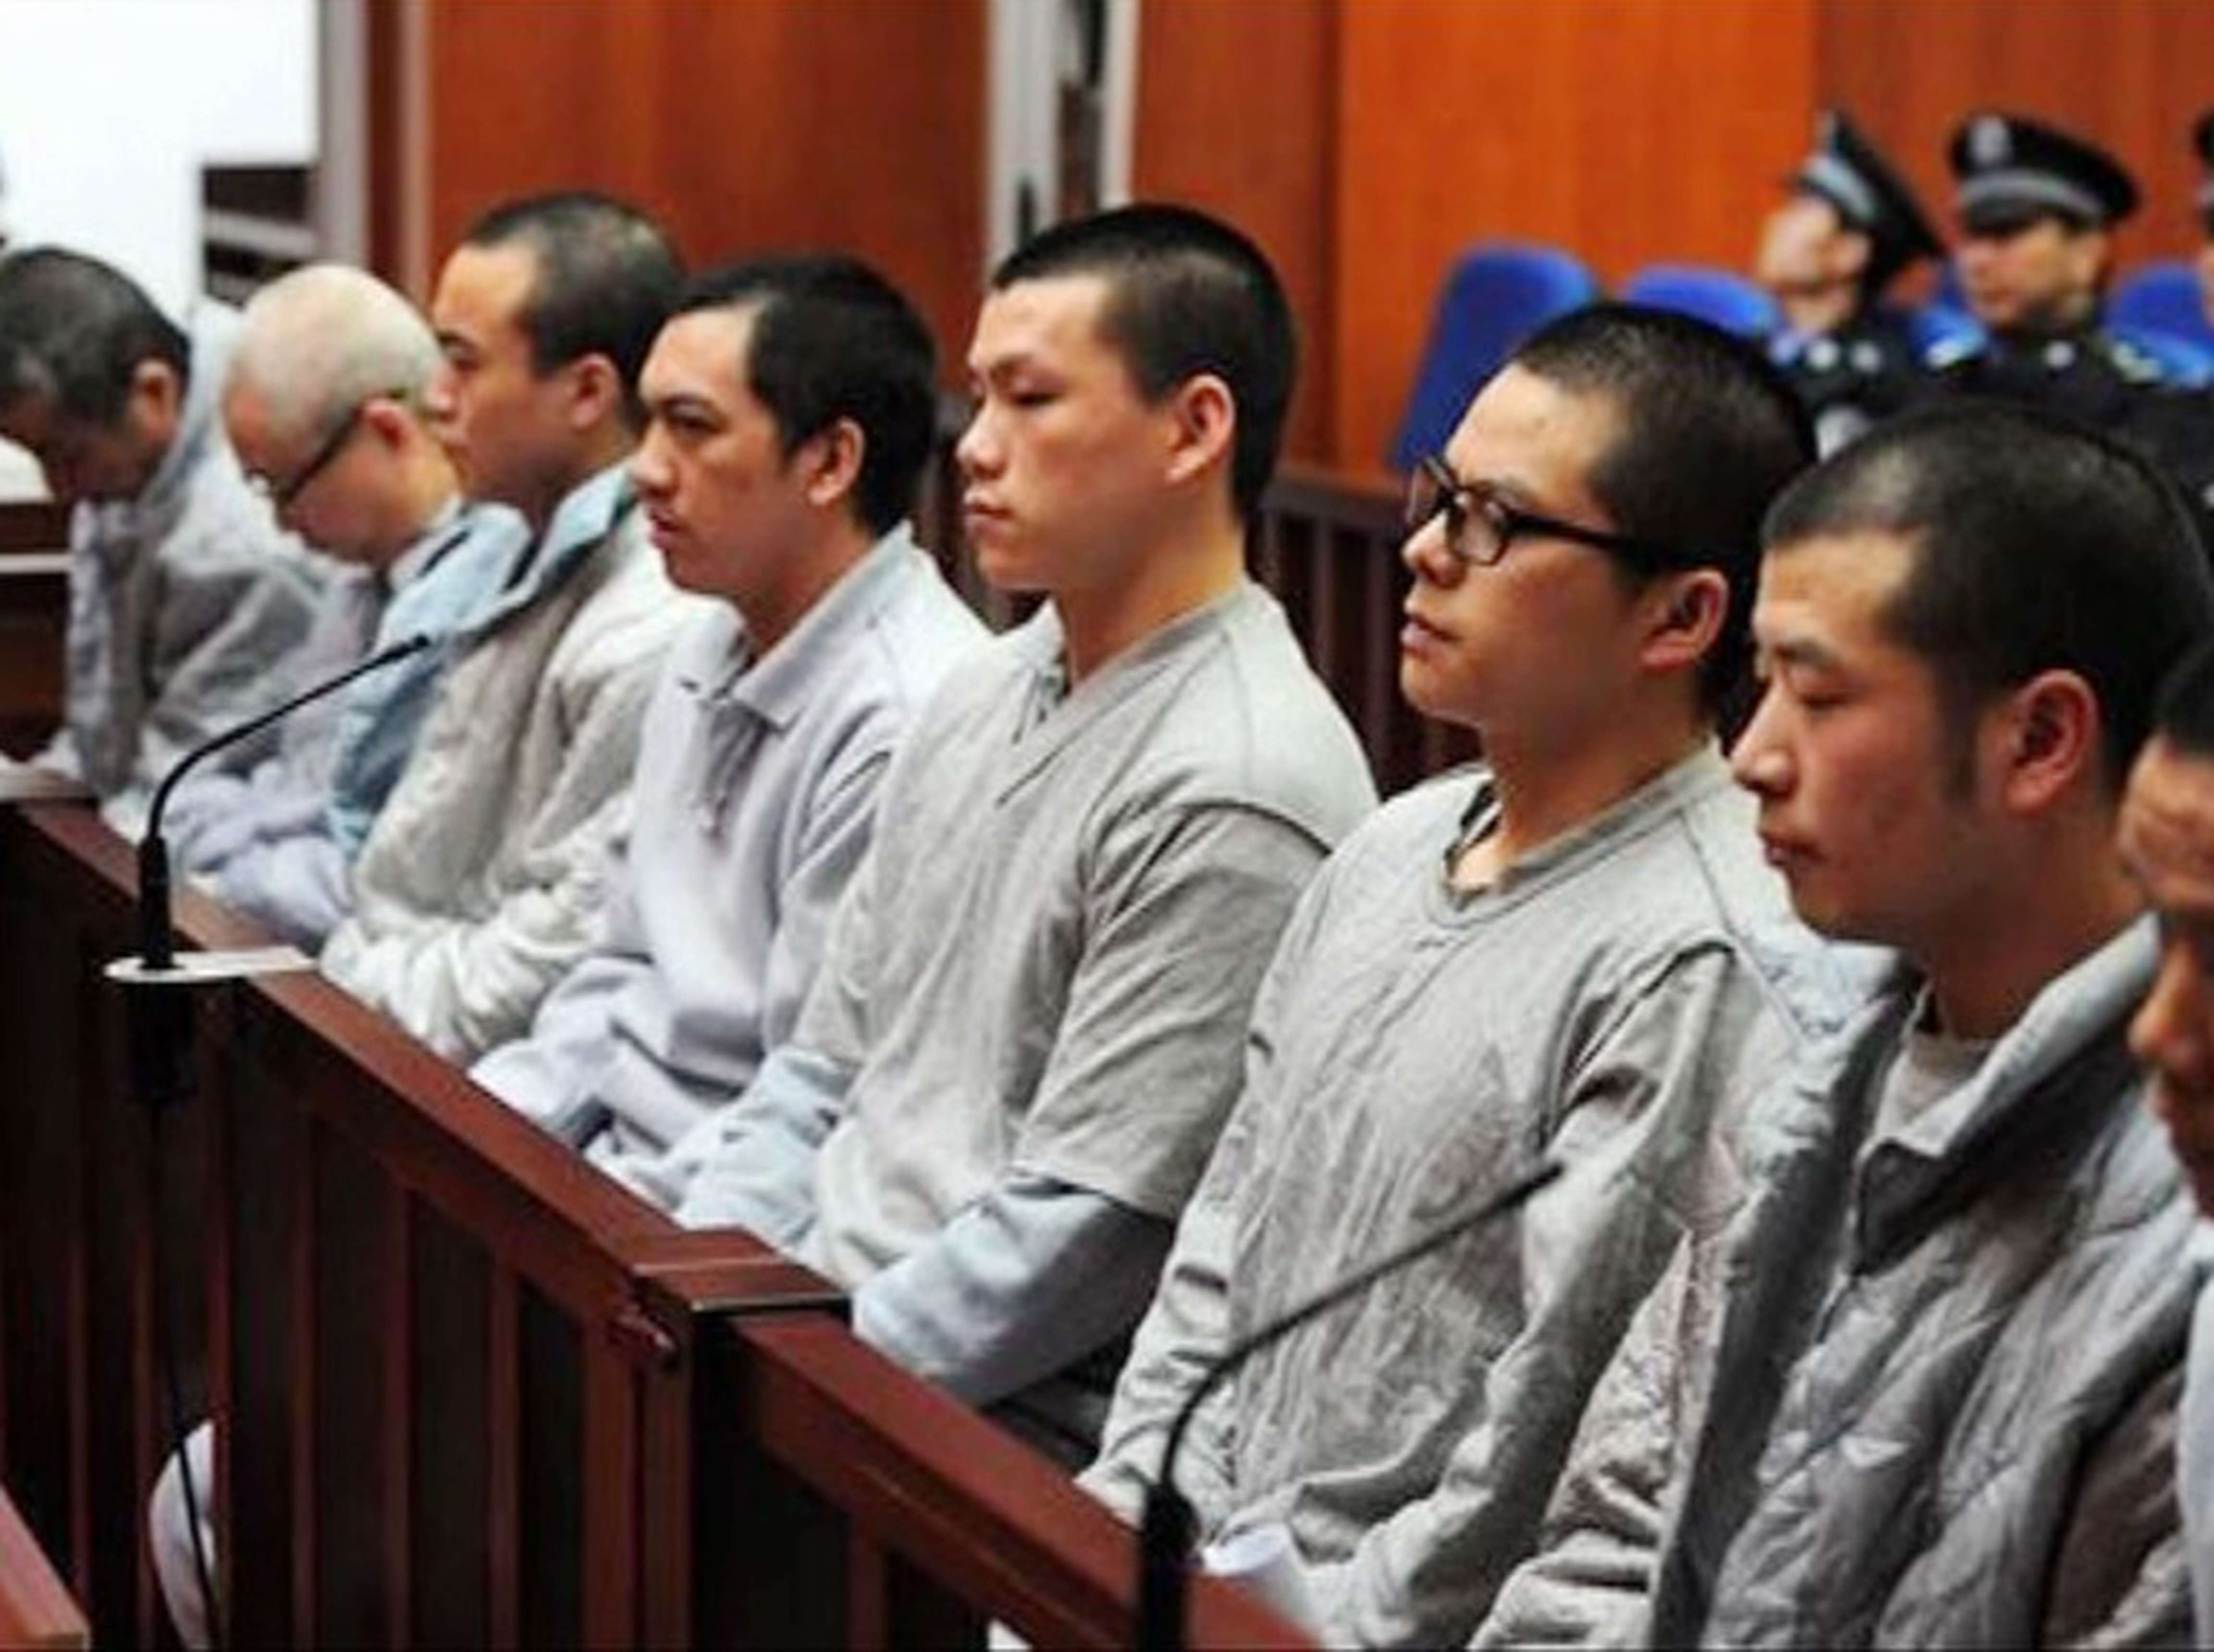 The defendants appearing in Shenzhen Intermediate Court in June. Photo: SCMP Pictures